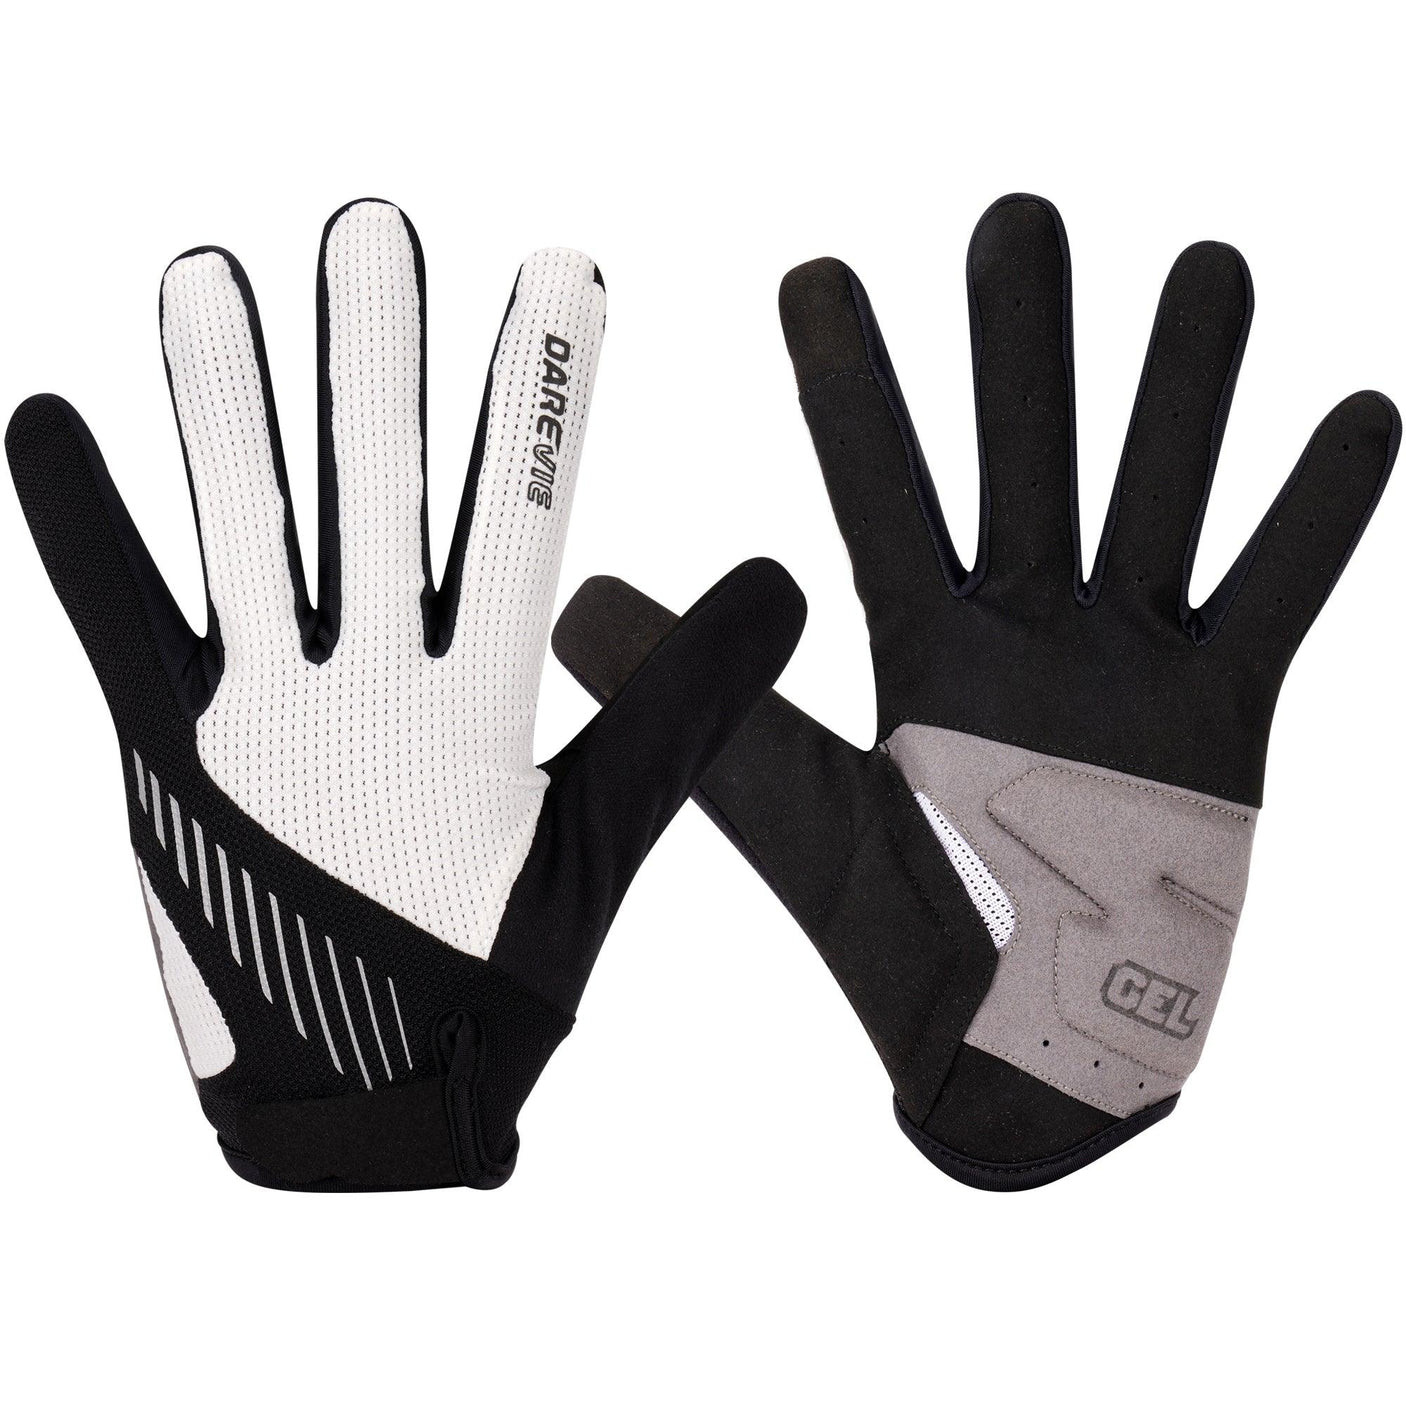 SWIFTSHIELD FULL FINGER CYCLING GLOVES-White - Darevie Shop